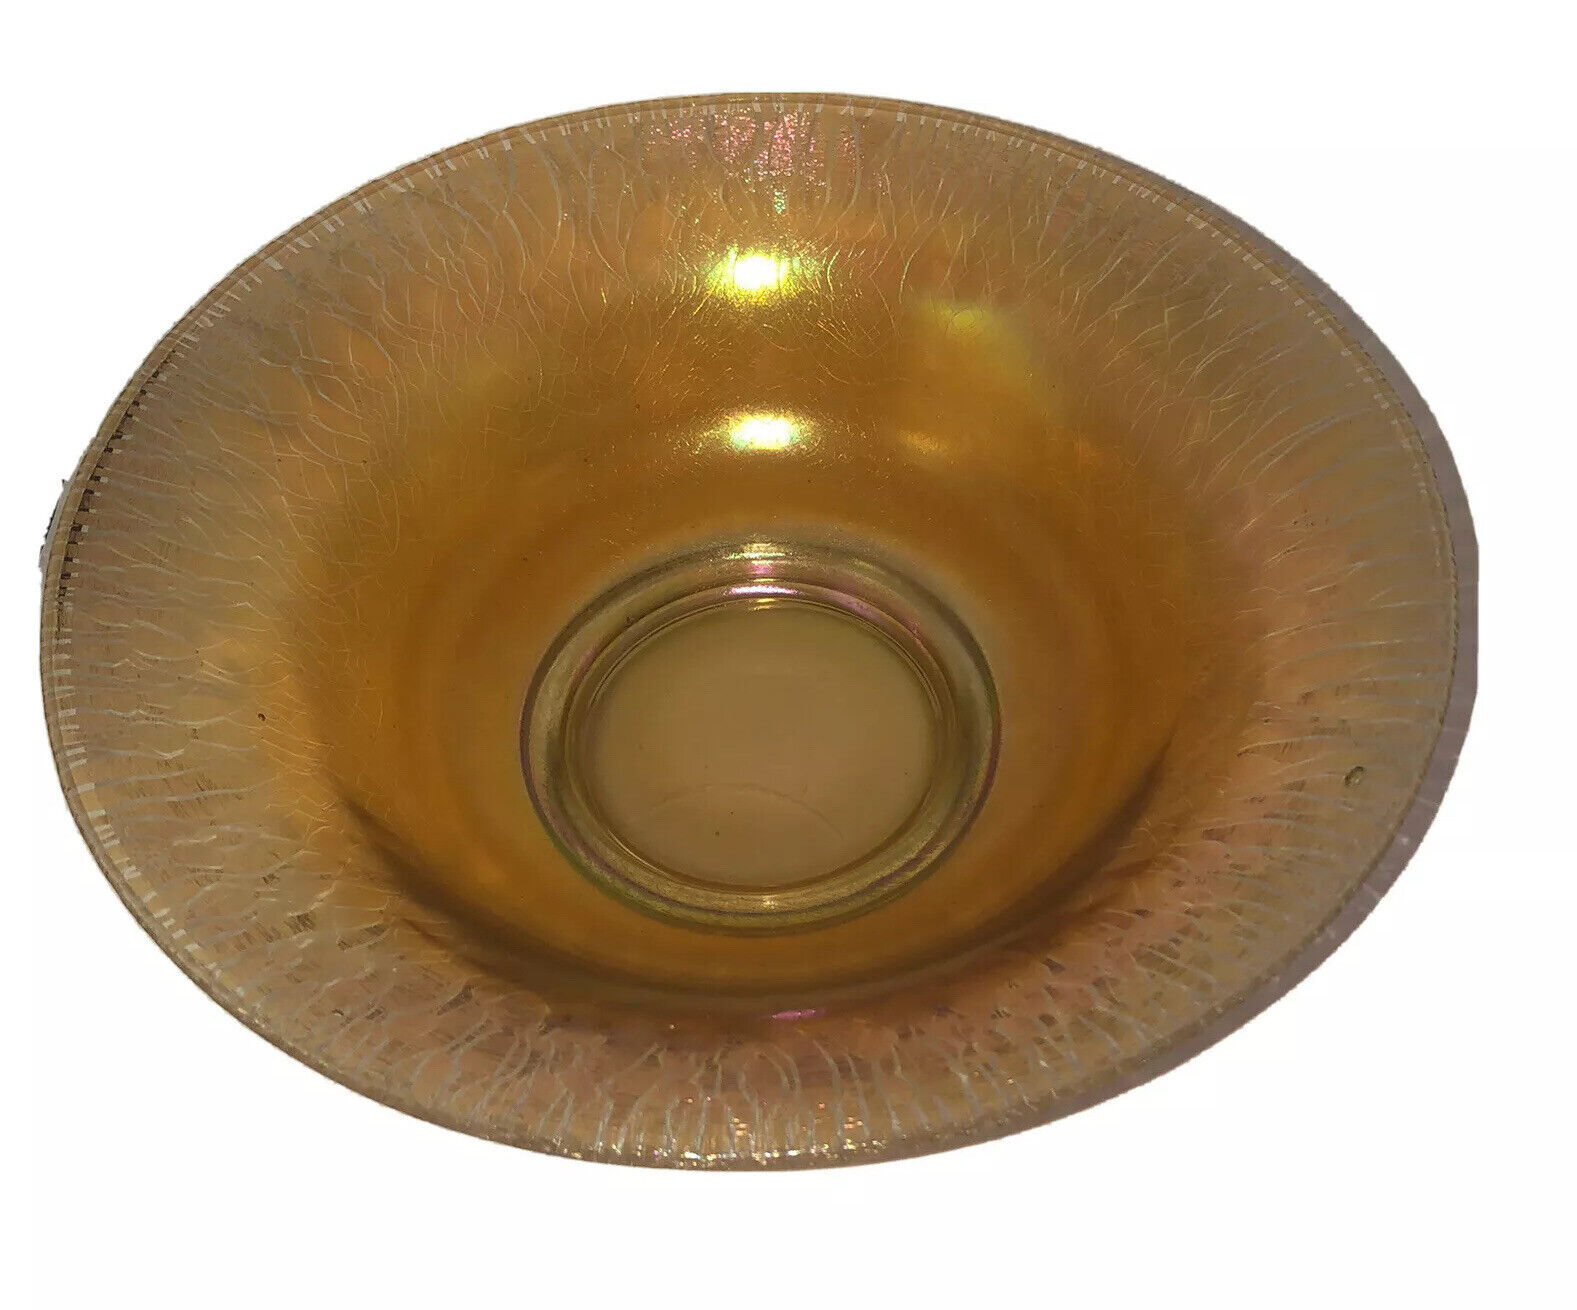 Vintage Iridescent Stretch Glass Footed Bowl 12” Wide Fun